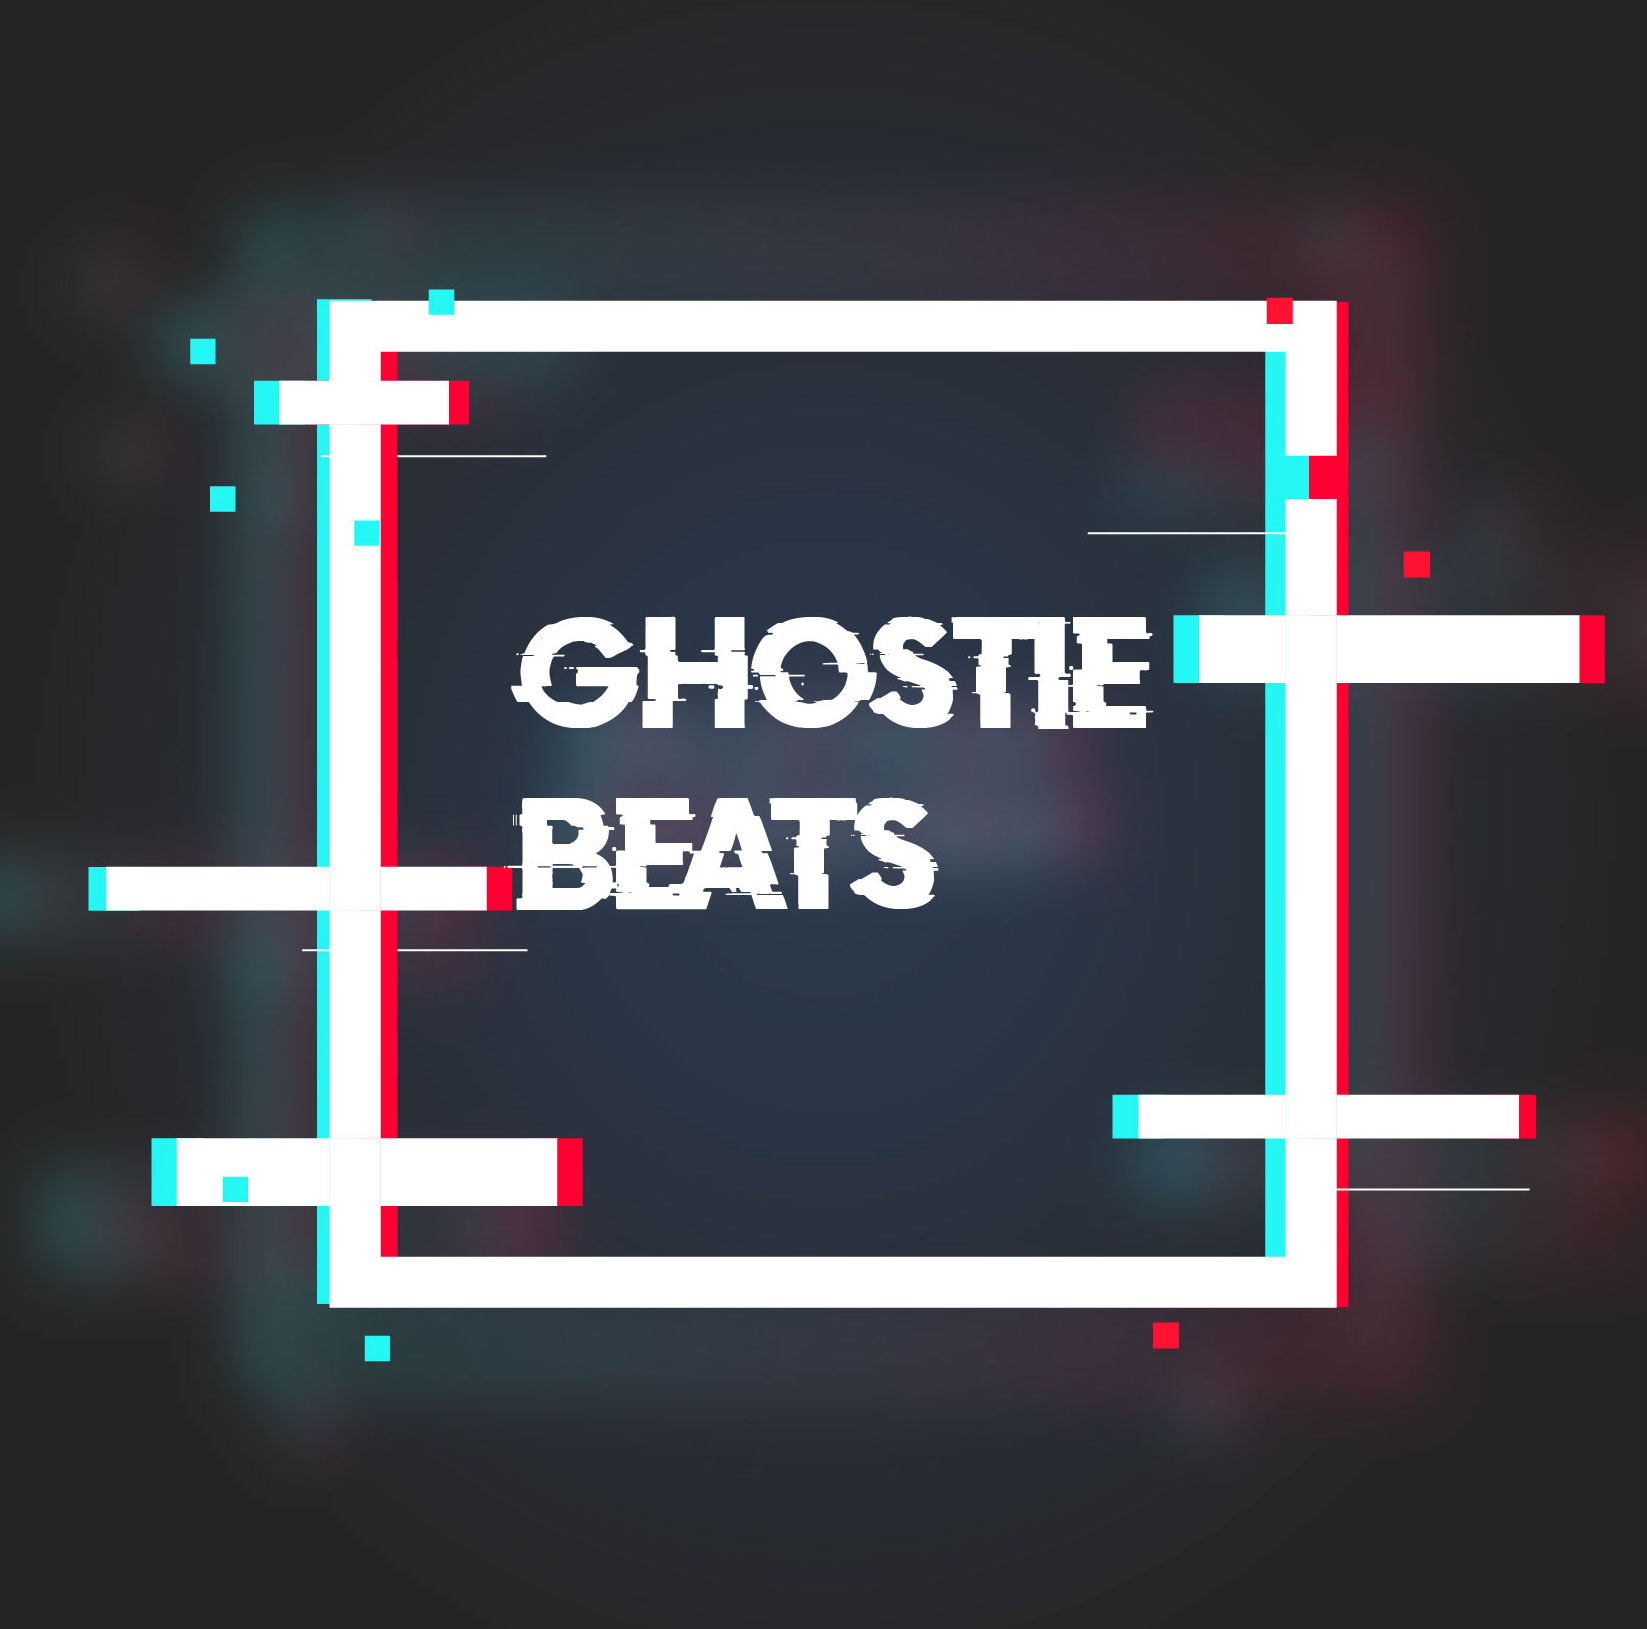 Ghostie Beats beat ghost producer